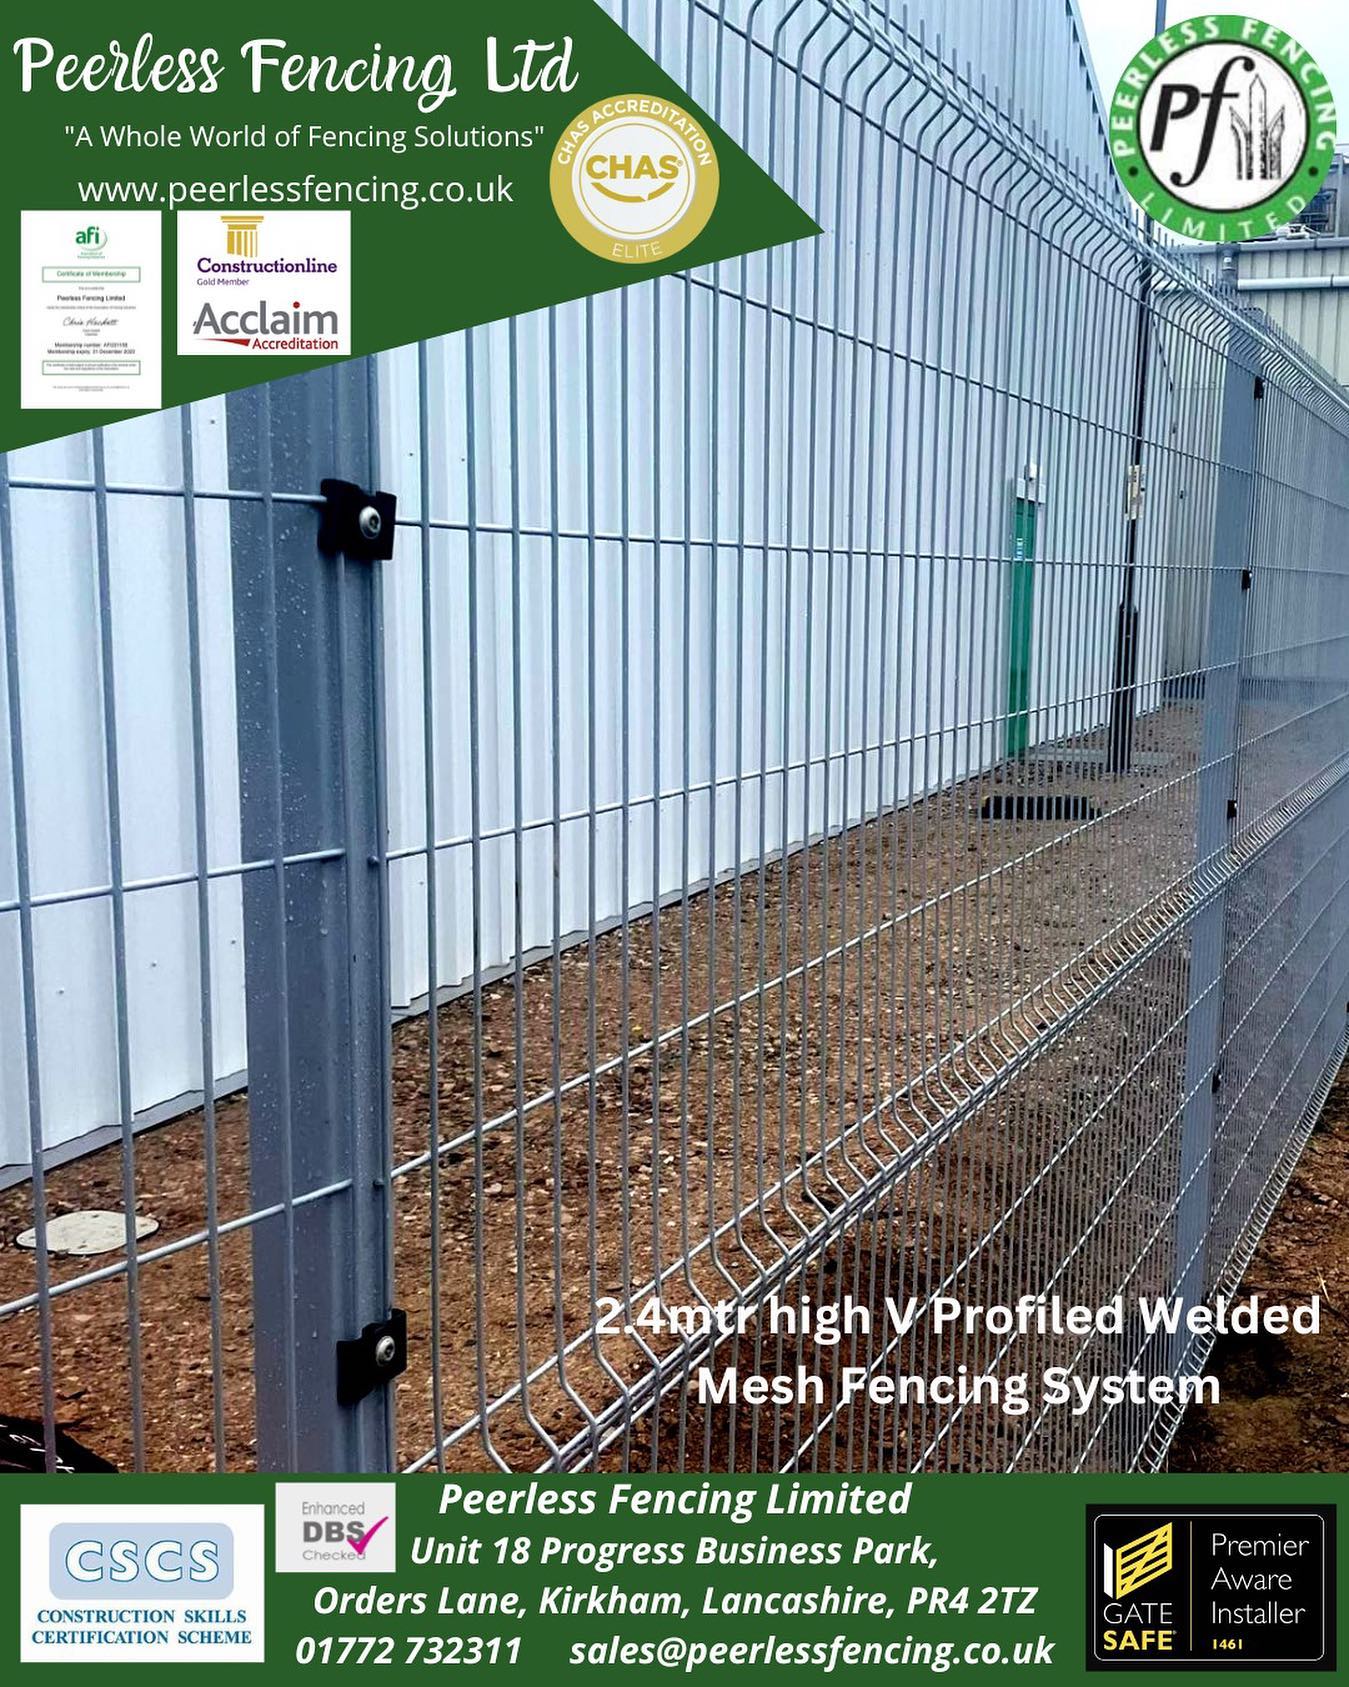 Peerless Fencing Limited – A Whole World of Fencing Solutions